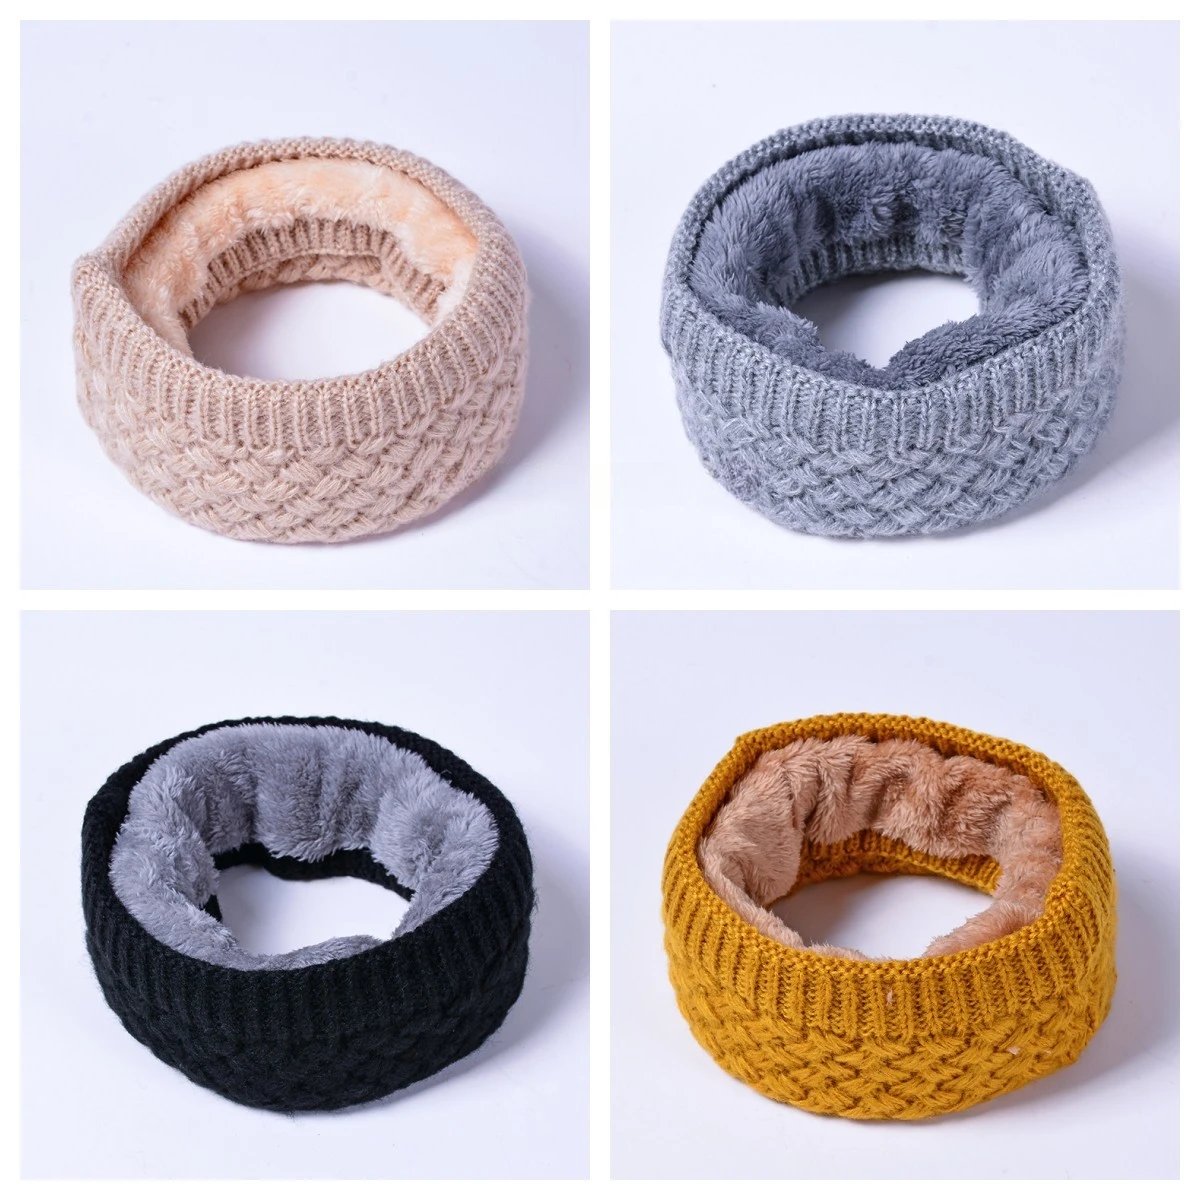 

Winter Warm Brushed Knit Neck Warmer Circle Go Out Wrap Cowl Loop Snood Shawl Outdoor Ski Climbing Scarf For Men Women